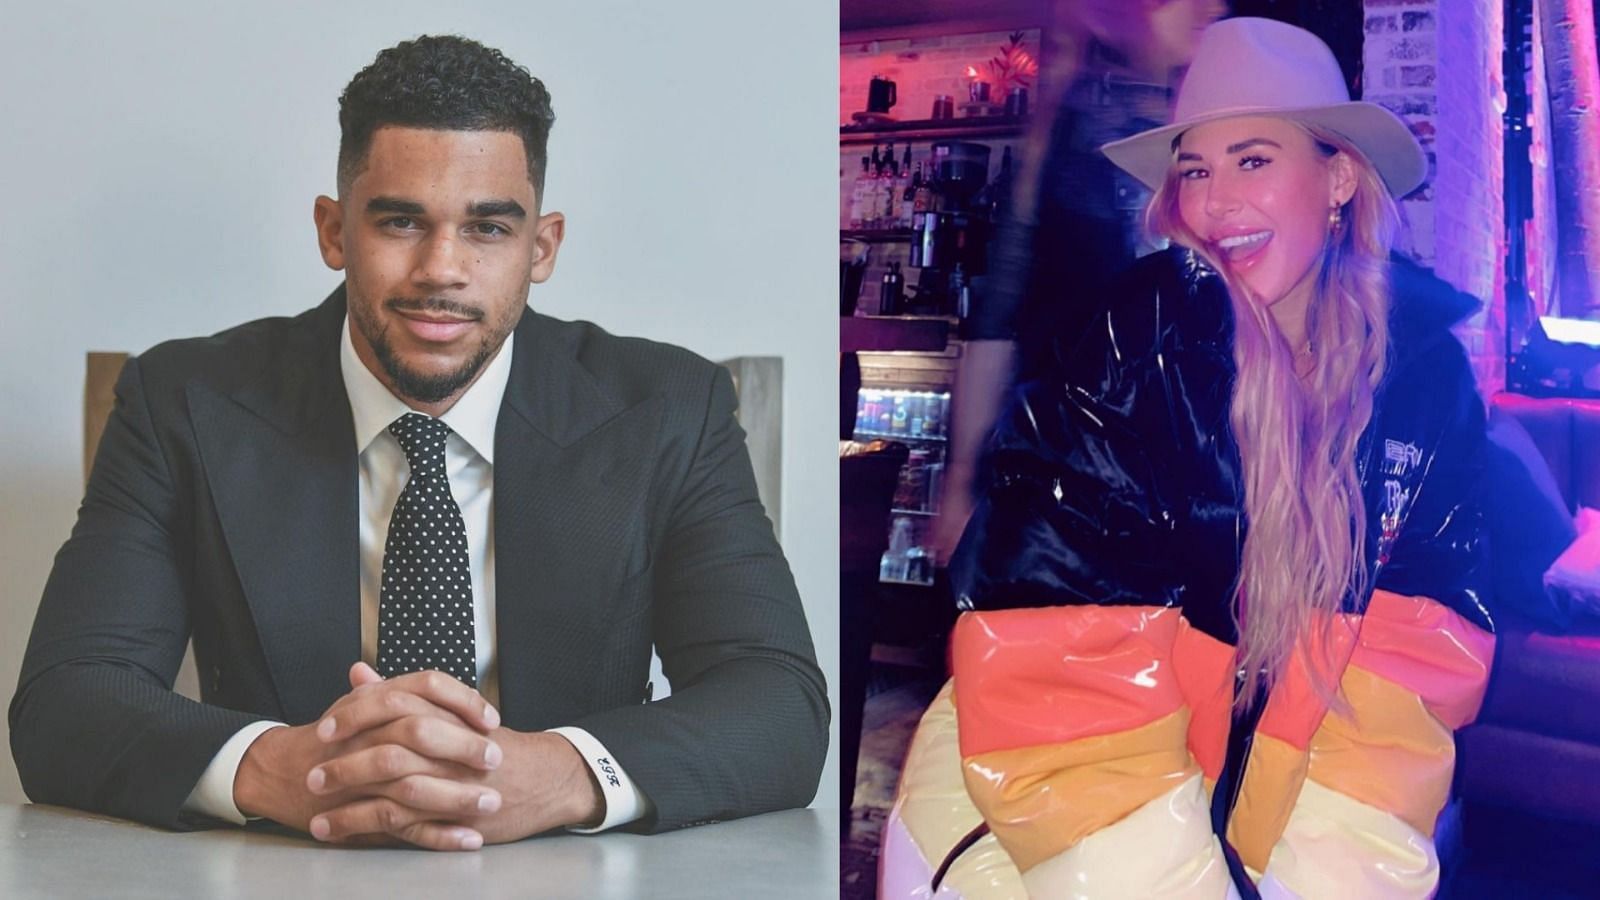 Evander Kane blasts 'soon-to-be-ex-wife' for 'trying to destroy my